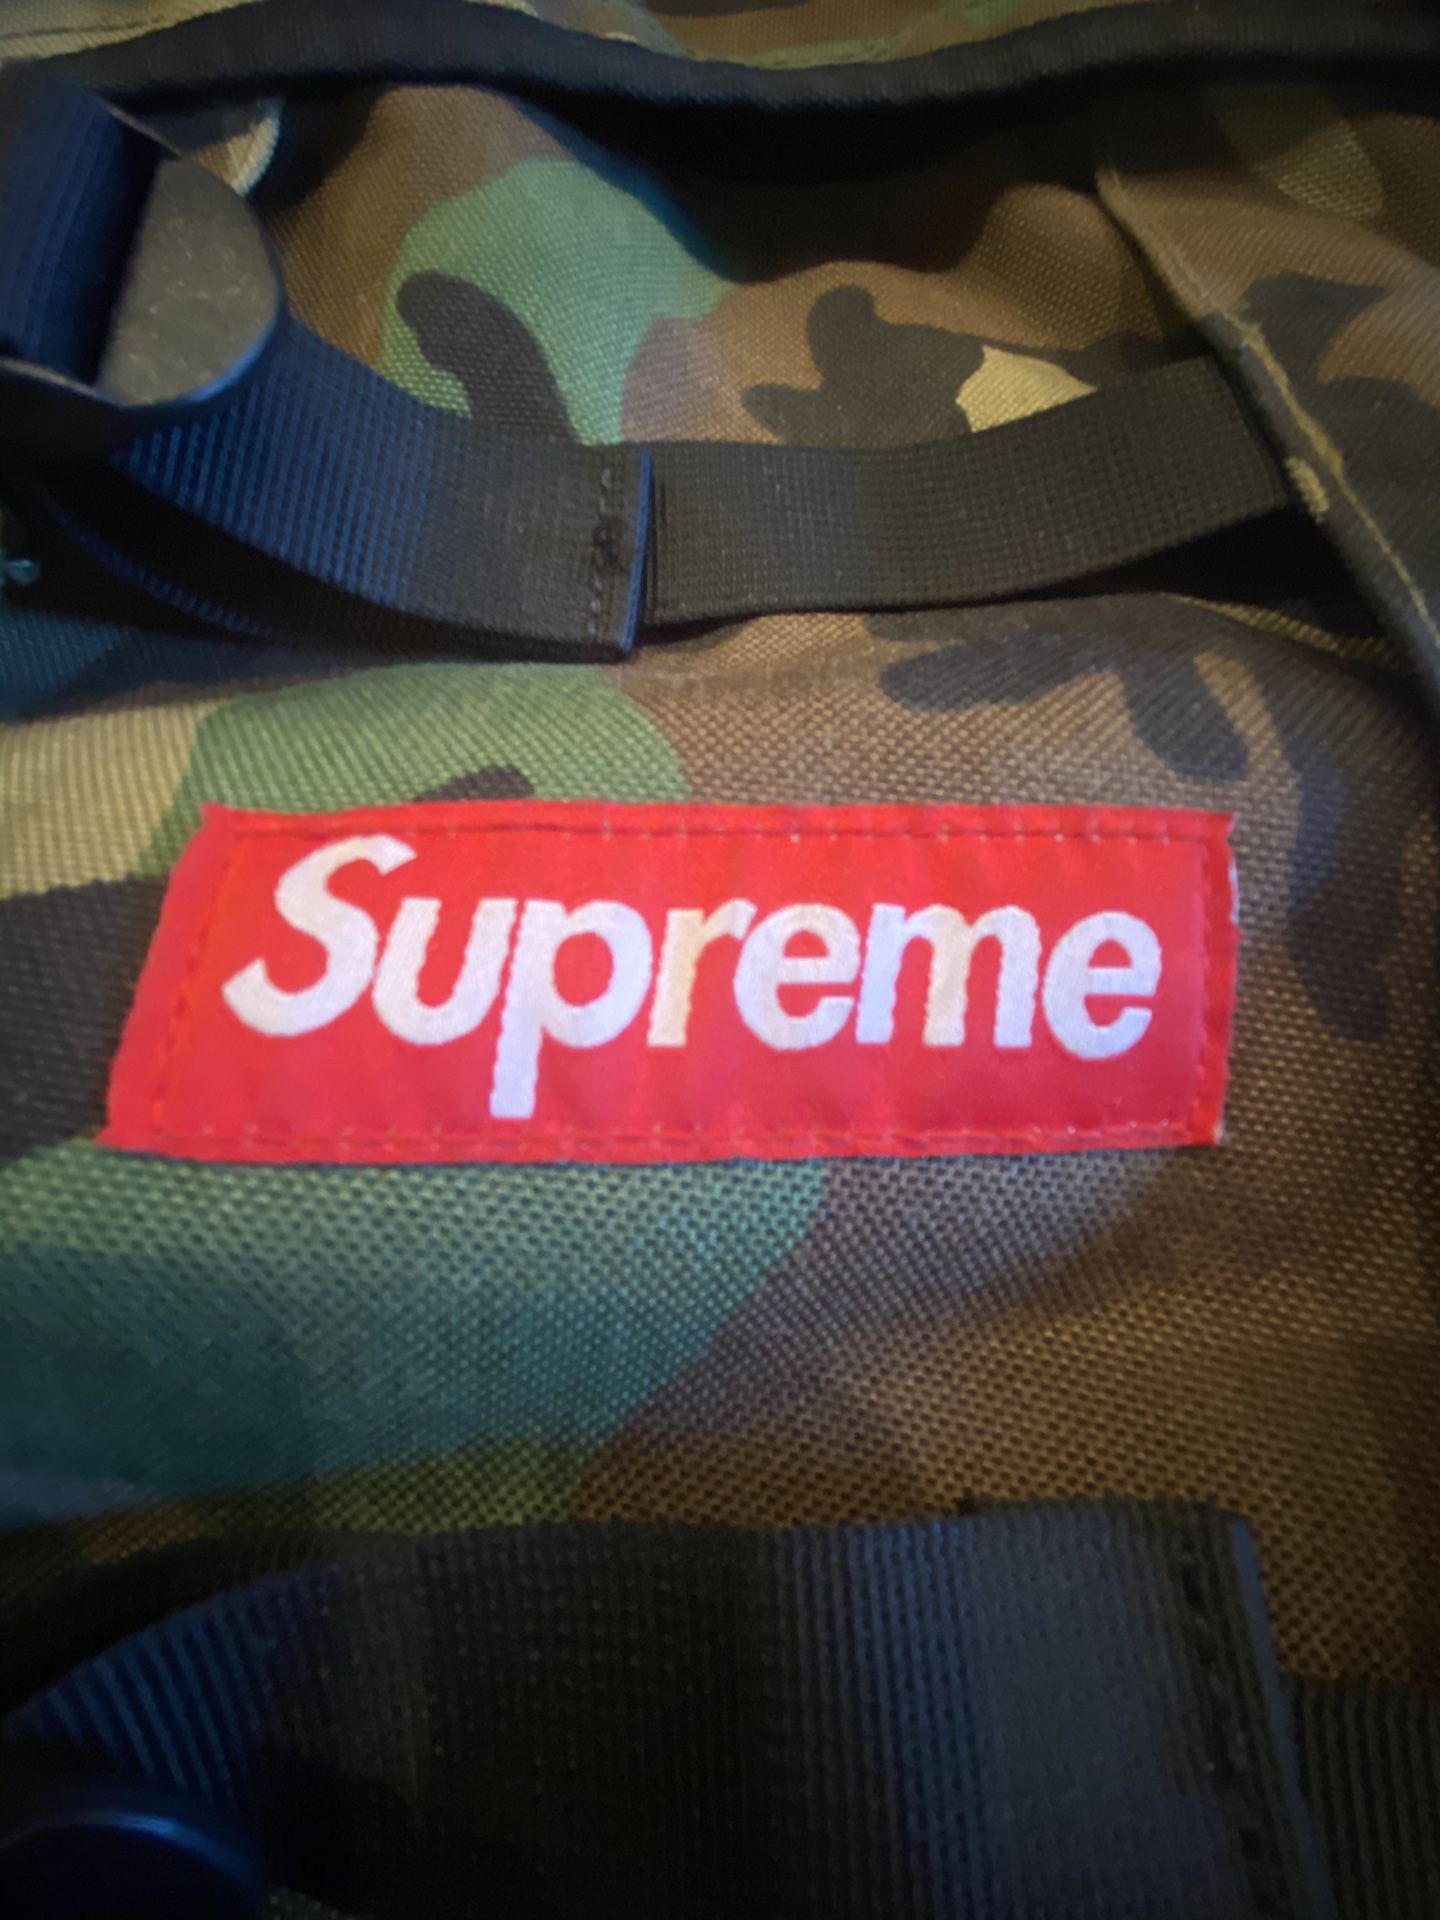 Supreme Camo Backpack for Sale in Port St. Lucie, FL - OfferUp